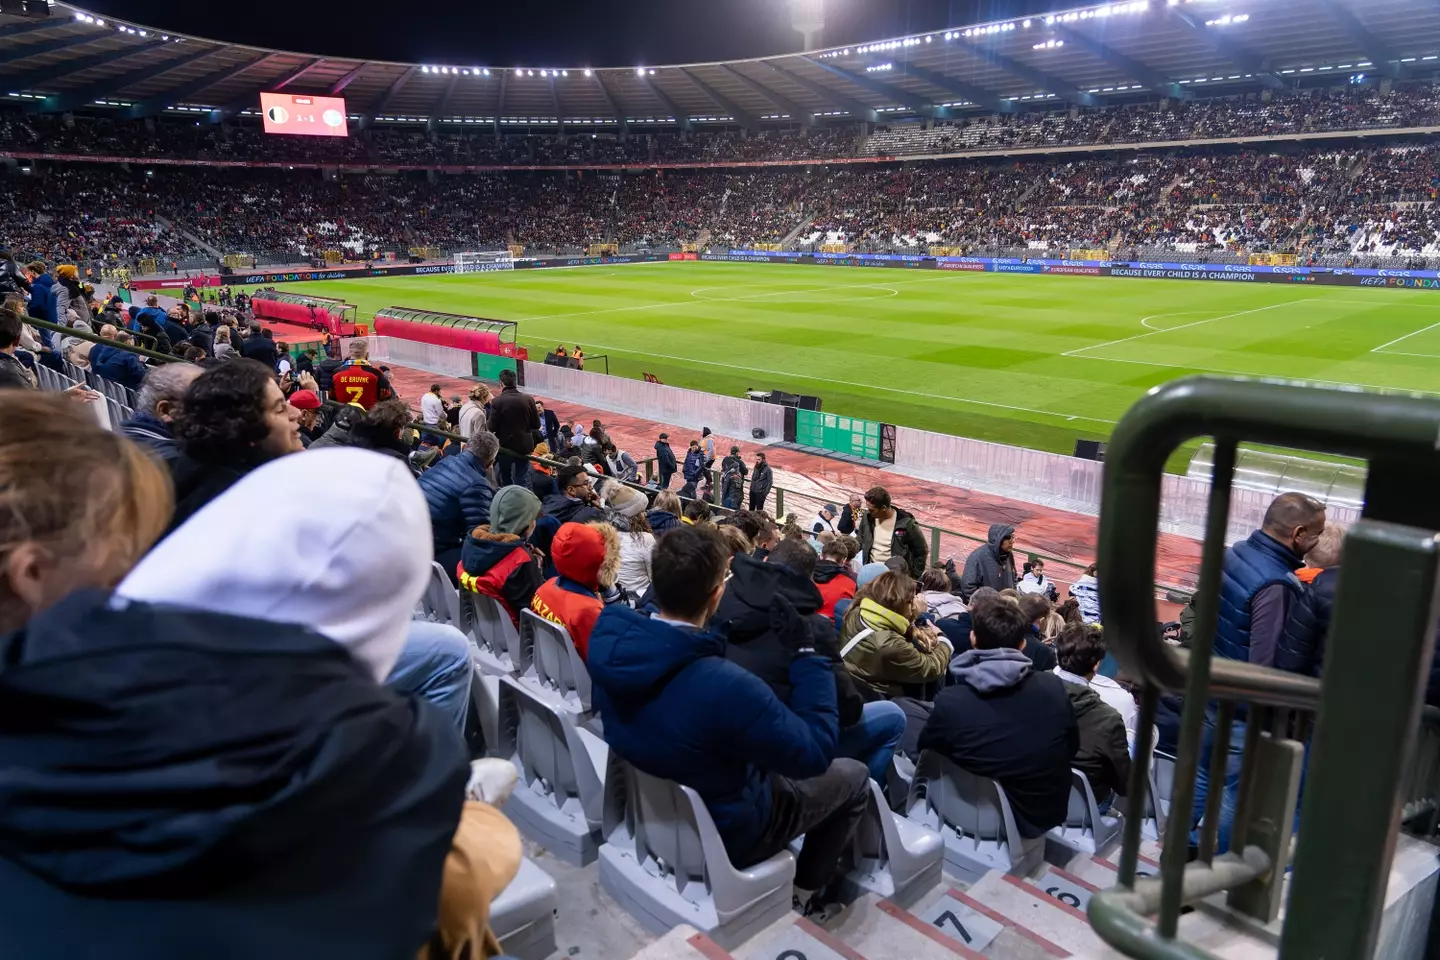 Fans detained inside the King Baudouin Stadium following the shooting. Image: Getty